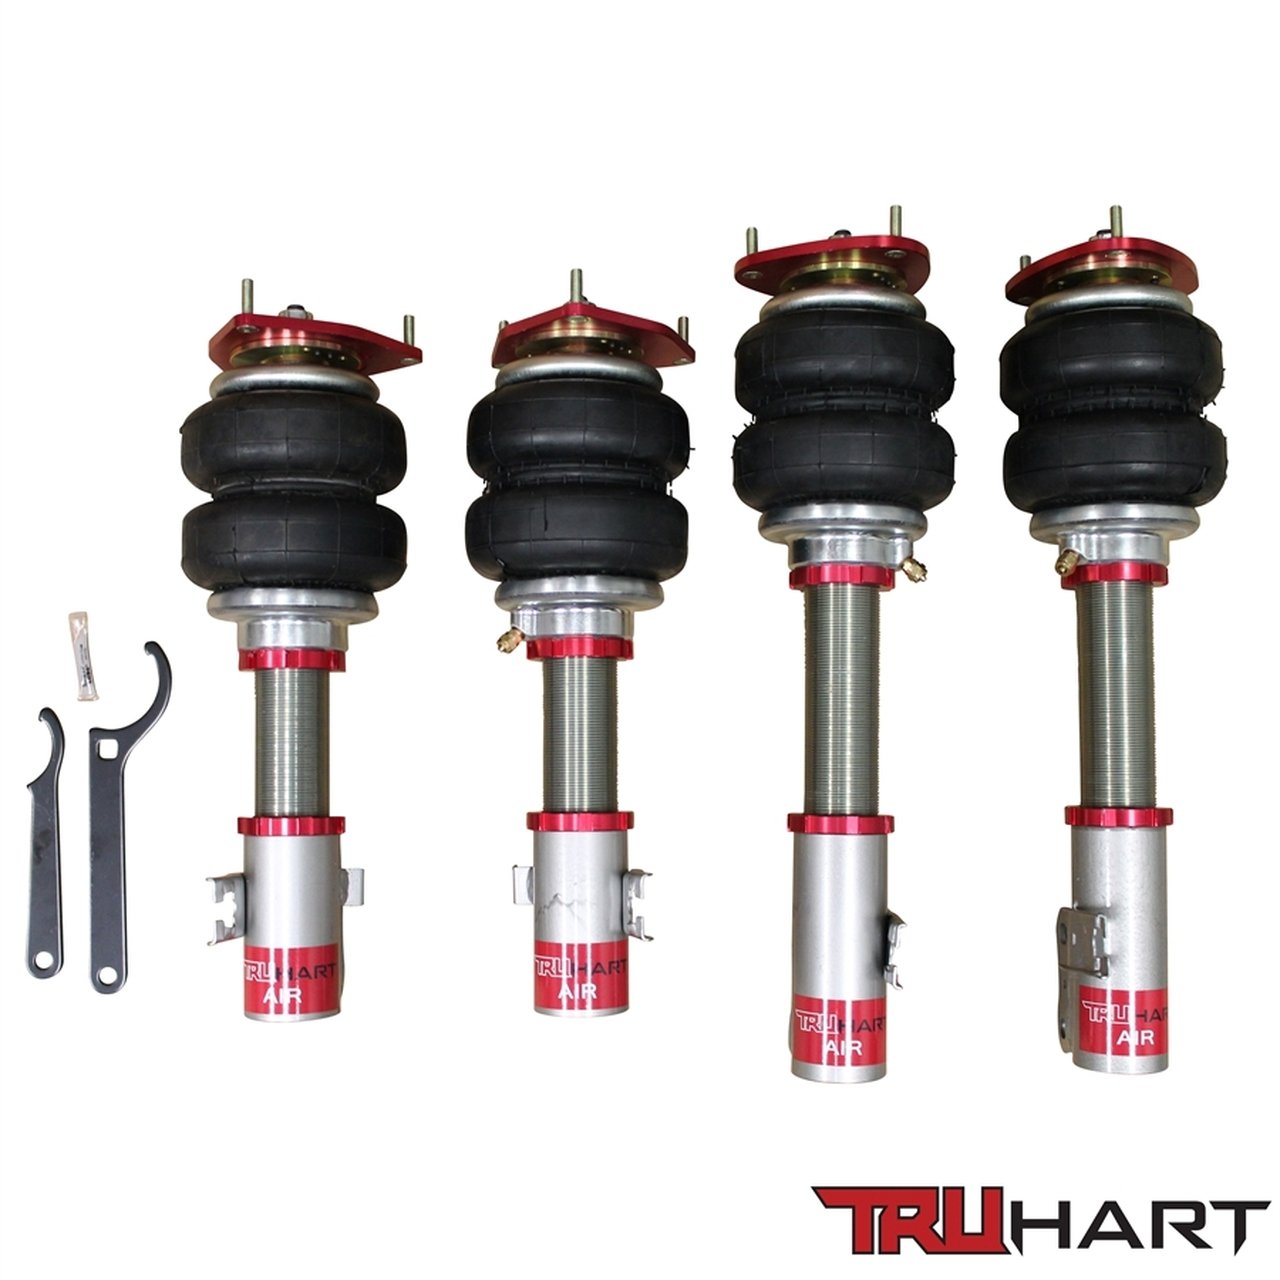 Coilover to Airstrut conversion kit. (Bag over coilover) – C2B suspension